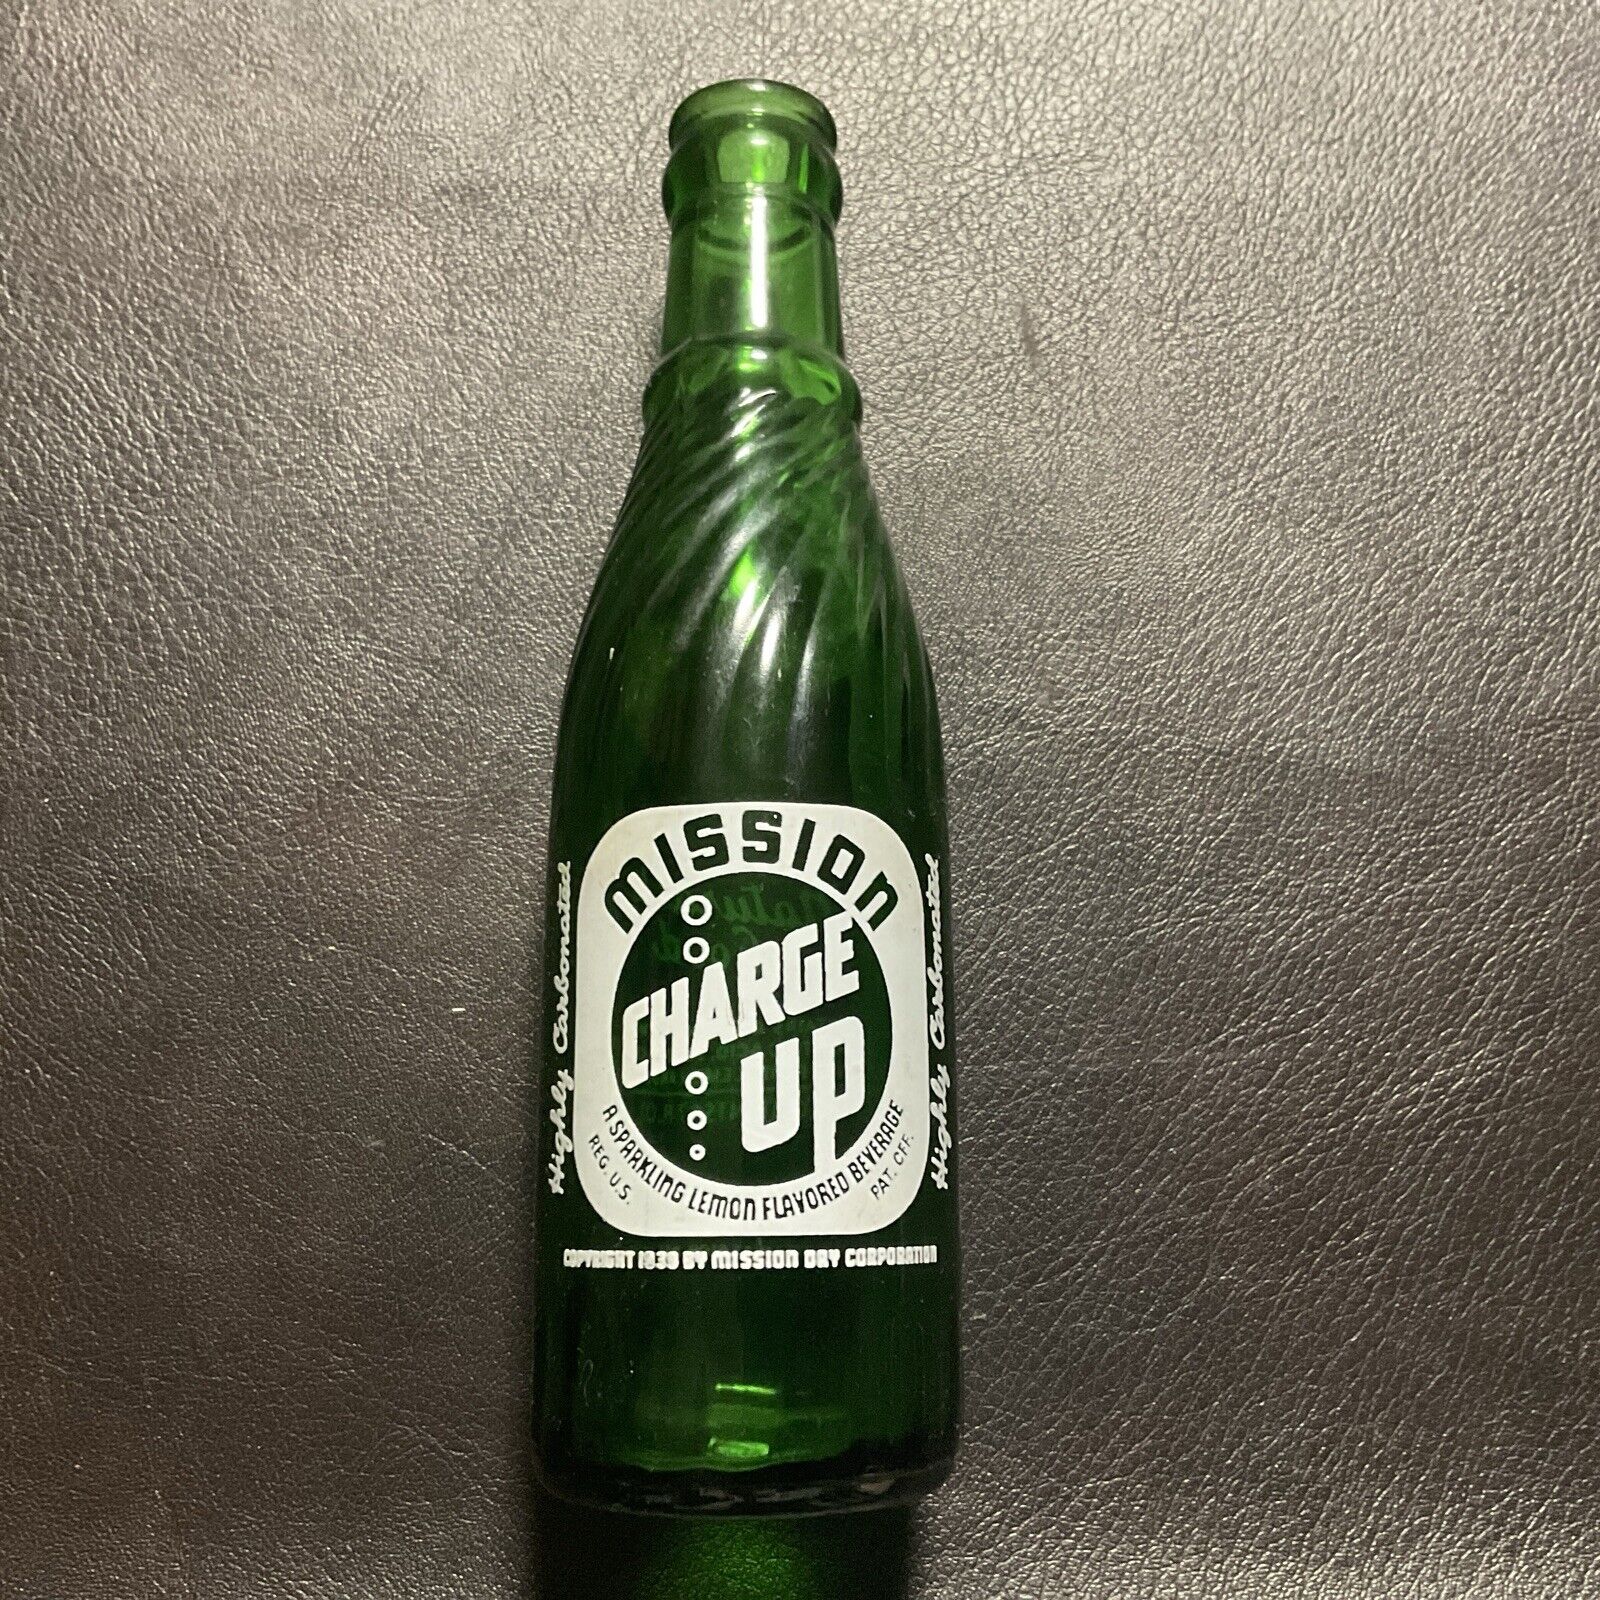 Mission Charge Up Green Soda Bottle